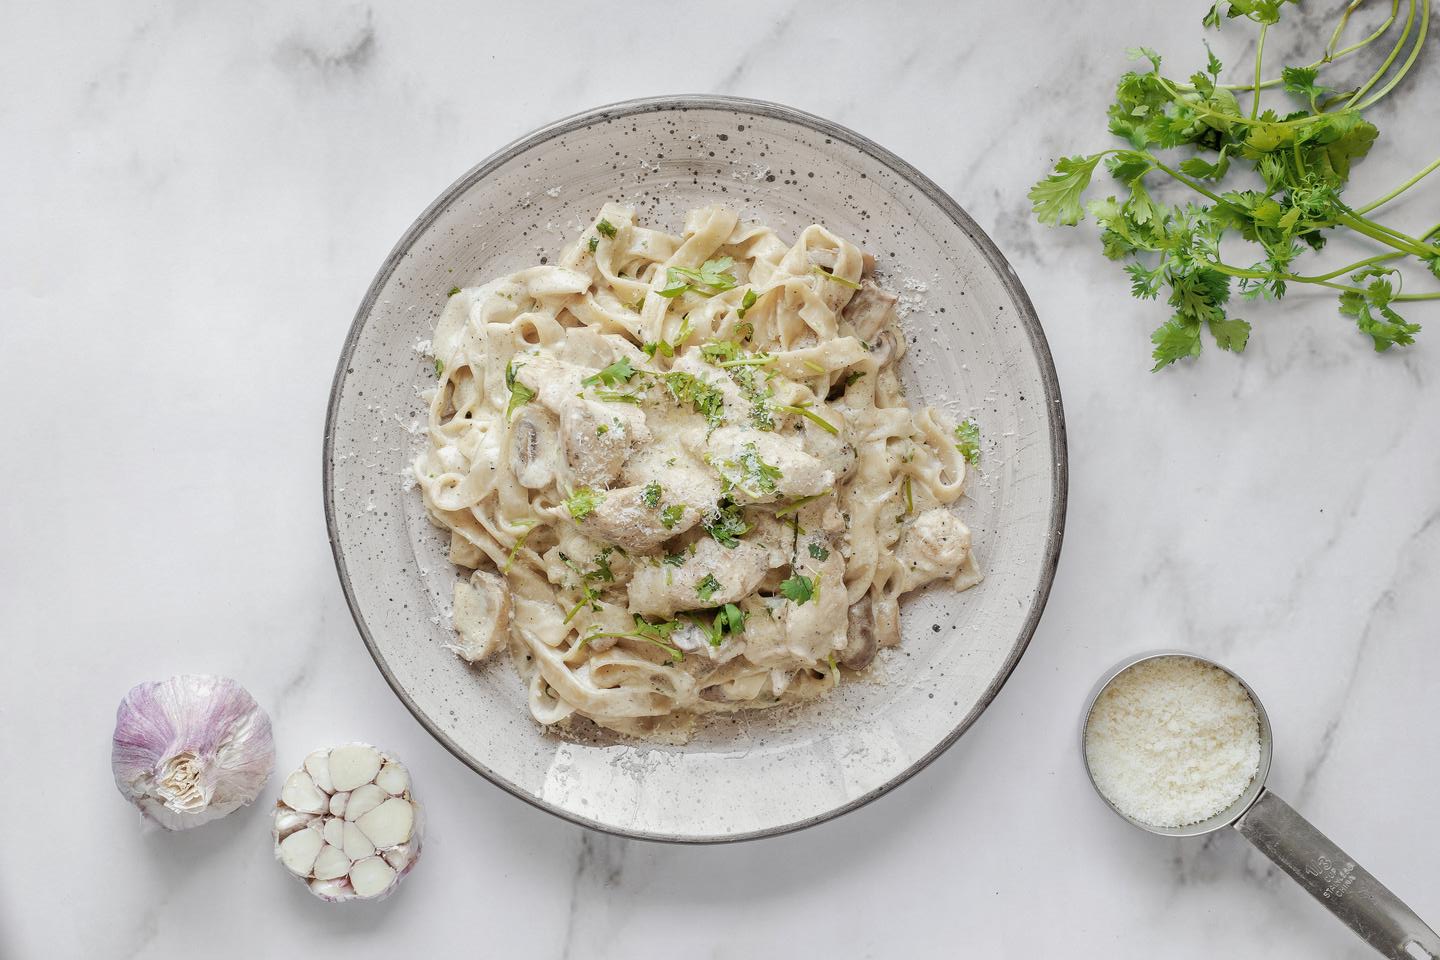 Shop for Ready-To-Eat Meals at Grocery Store to Know Yo… Quiz Fettuccine alfredo pasta